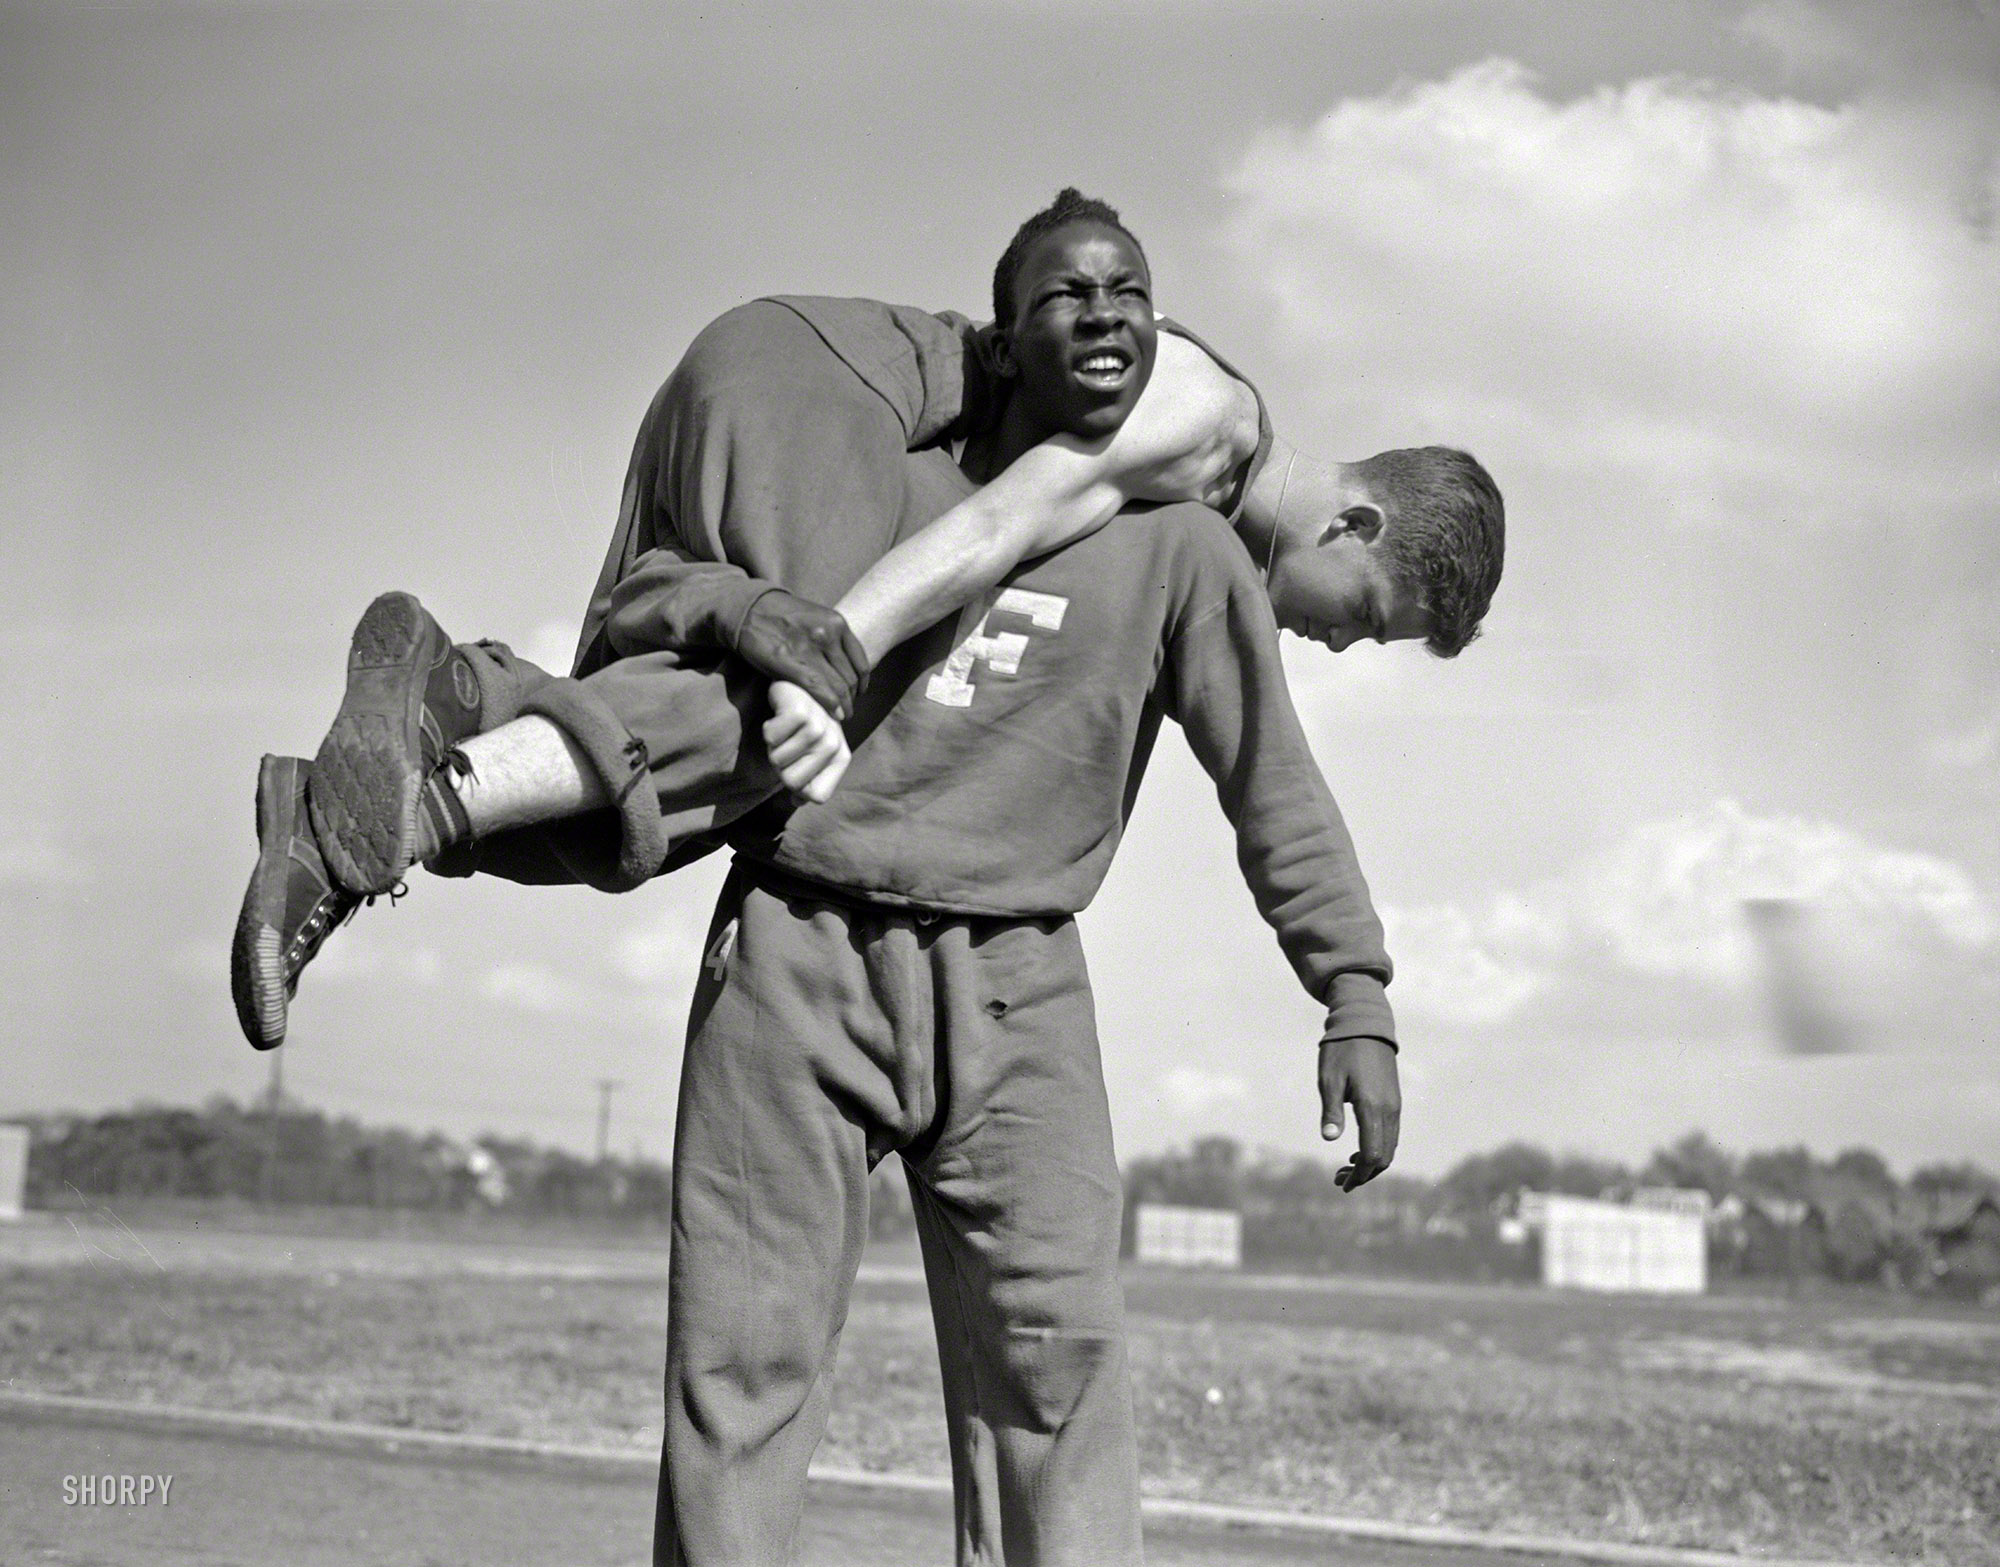 October 1942. "High school Victory Corps. The 'fireman's carry.' Method of carrying a wounded comrade is shown here by boys in the 'commando' course of the physical education program at Flushing High School, Queens, New York." Photo by William Perlitch for the Office of War Information. View full size.